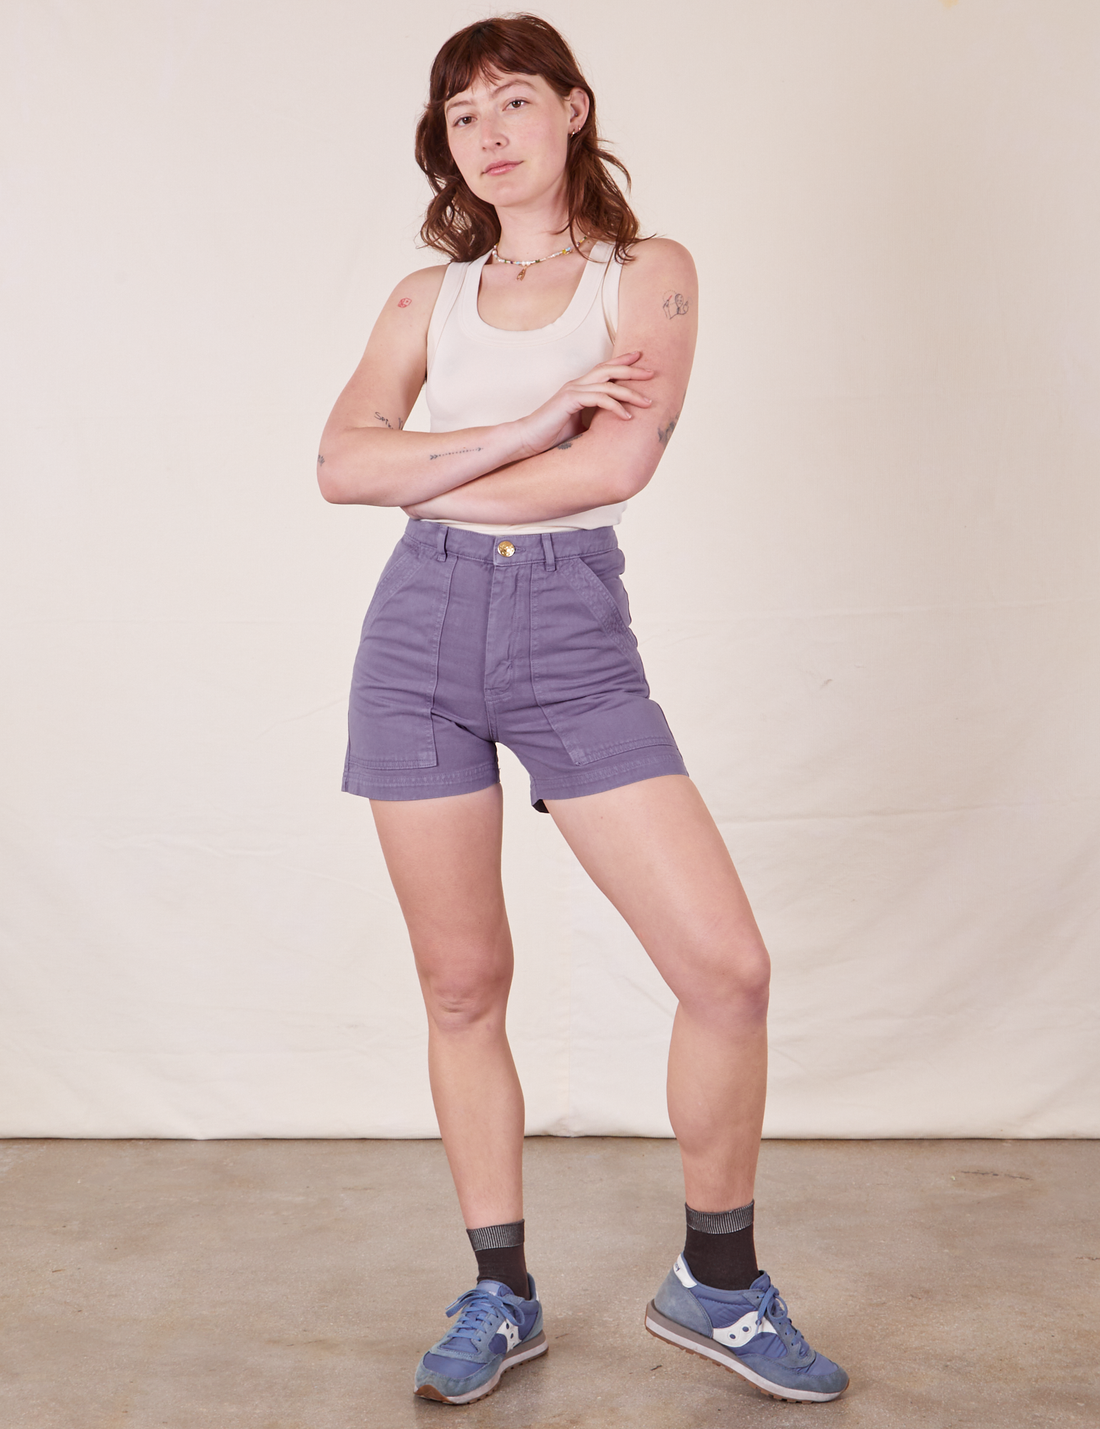 Alex is 5'8" and wearing size XS Classic Work Shorts in Faded Grape paired with a vintage off-white Tank Top